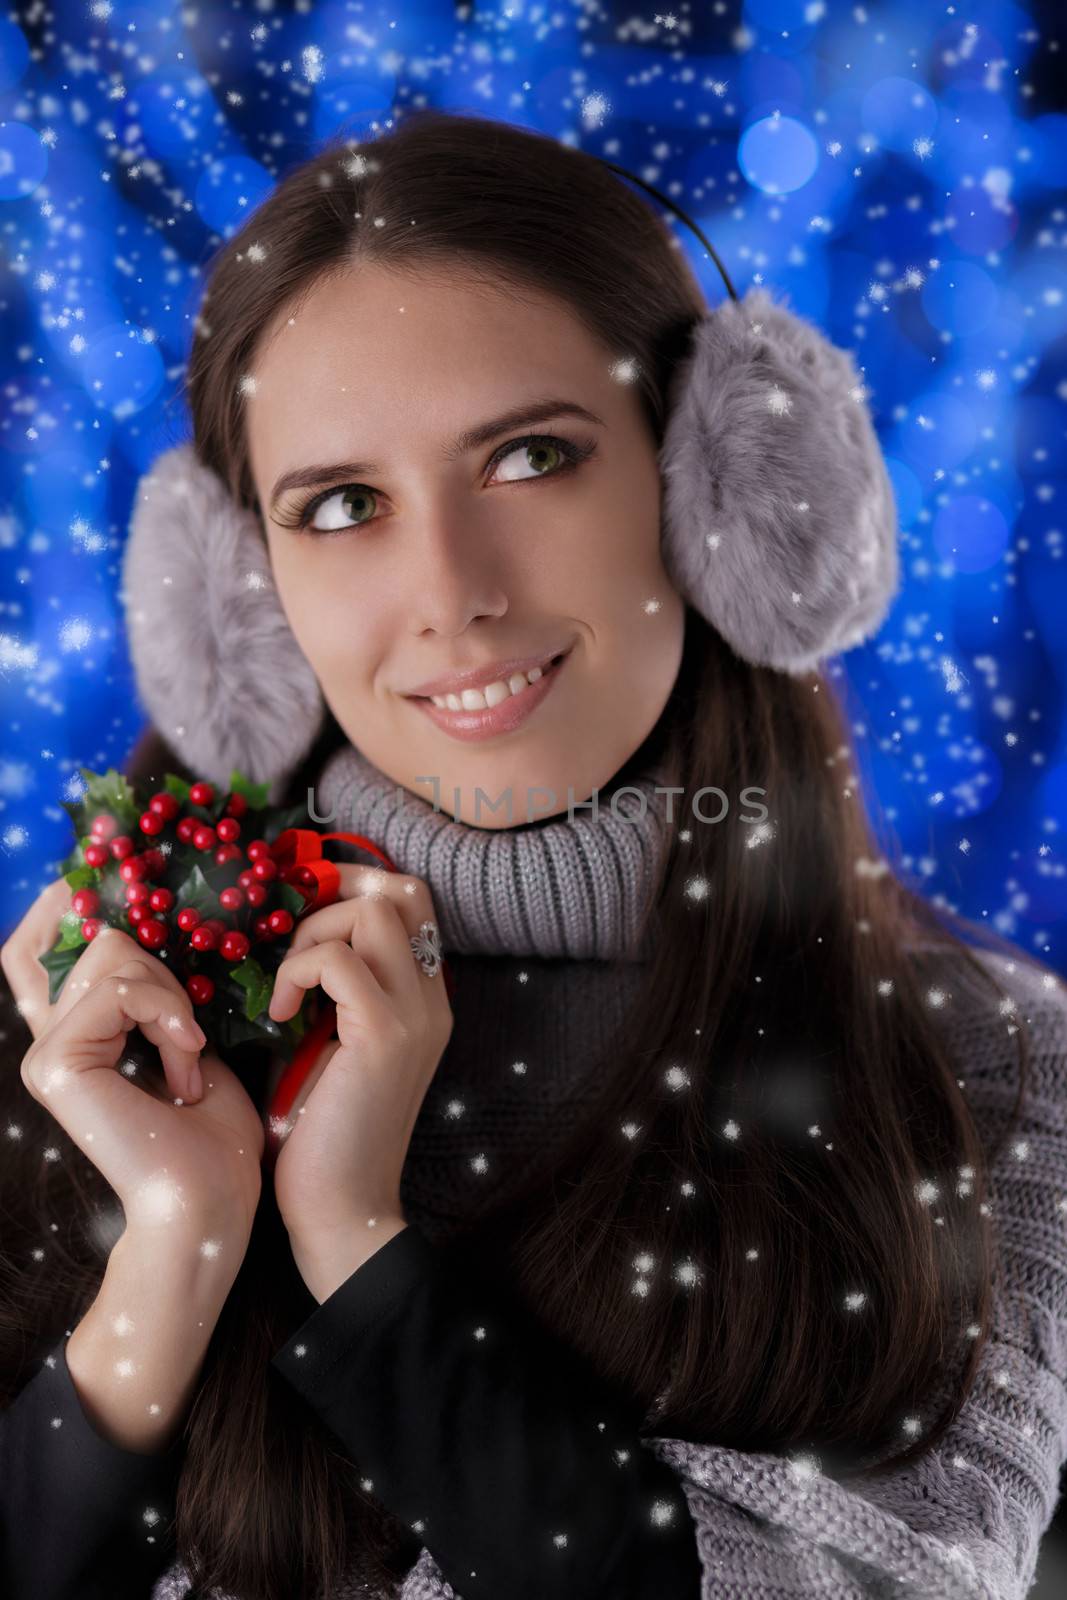 Beautiful girl holding a Christmas decoration with snow falling around her.